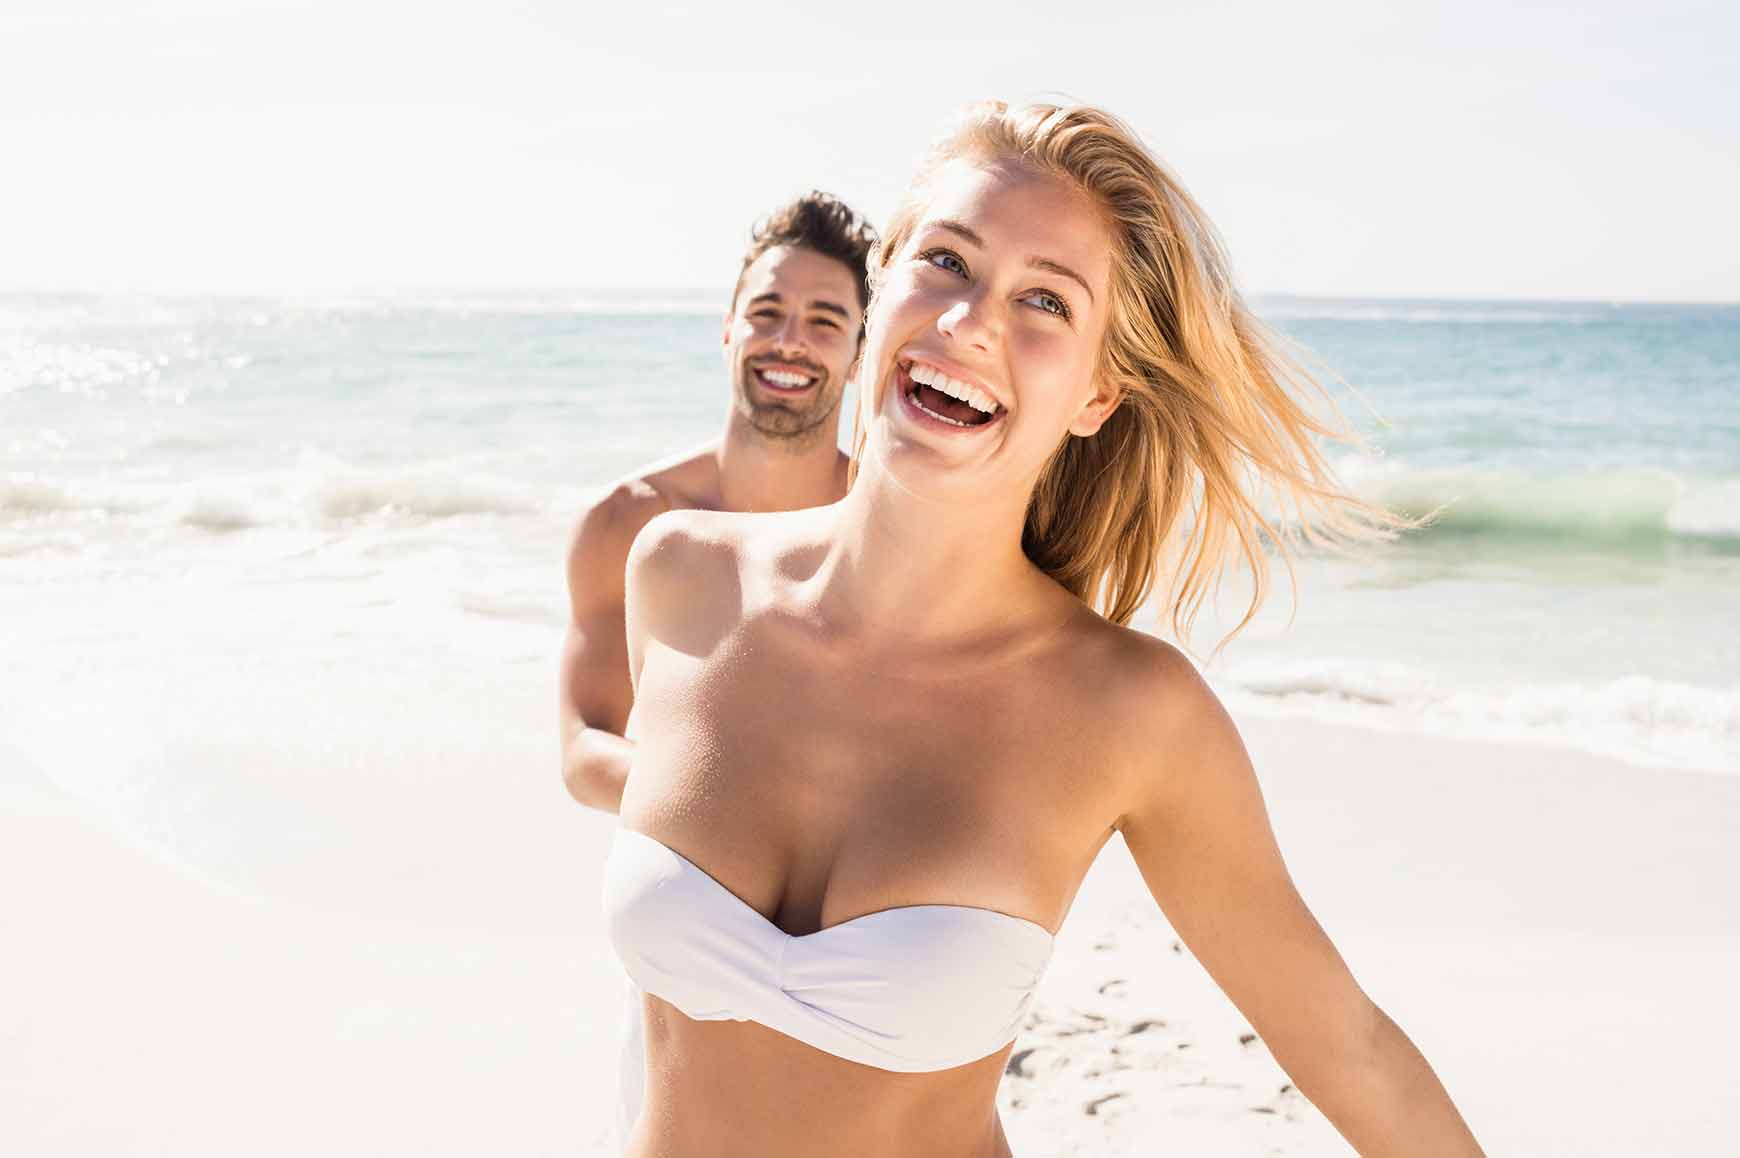 With every breast enhancement procedure being unique, patients need to consult an expert to determine the most suitable for them. Contact Dr. Melissa Marks to find out more.